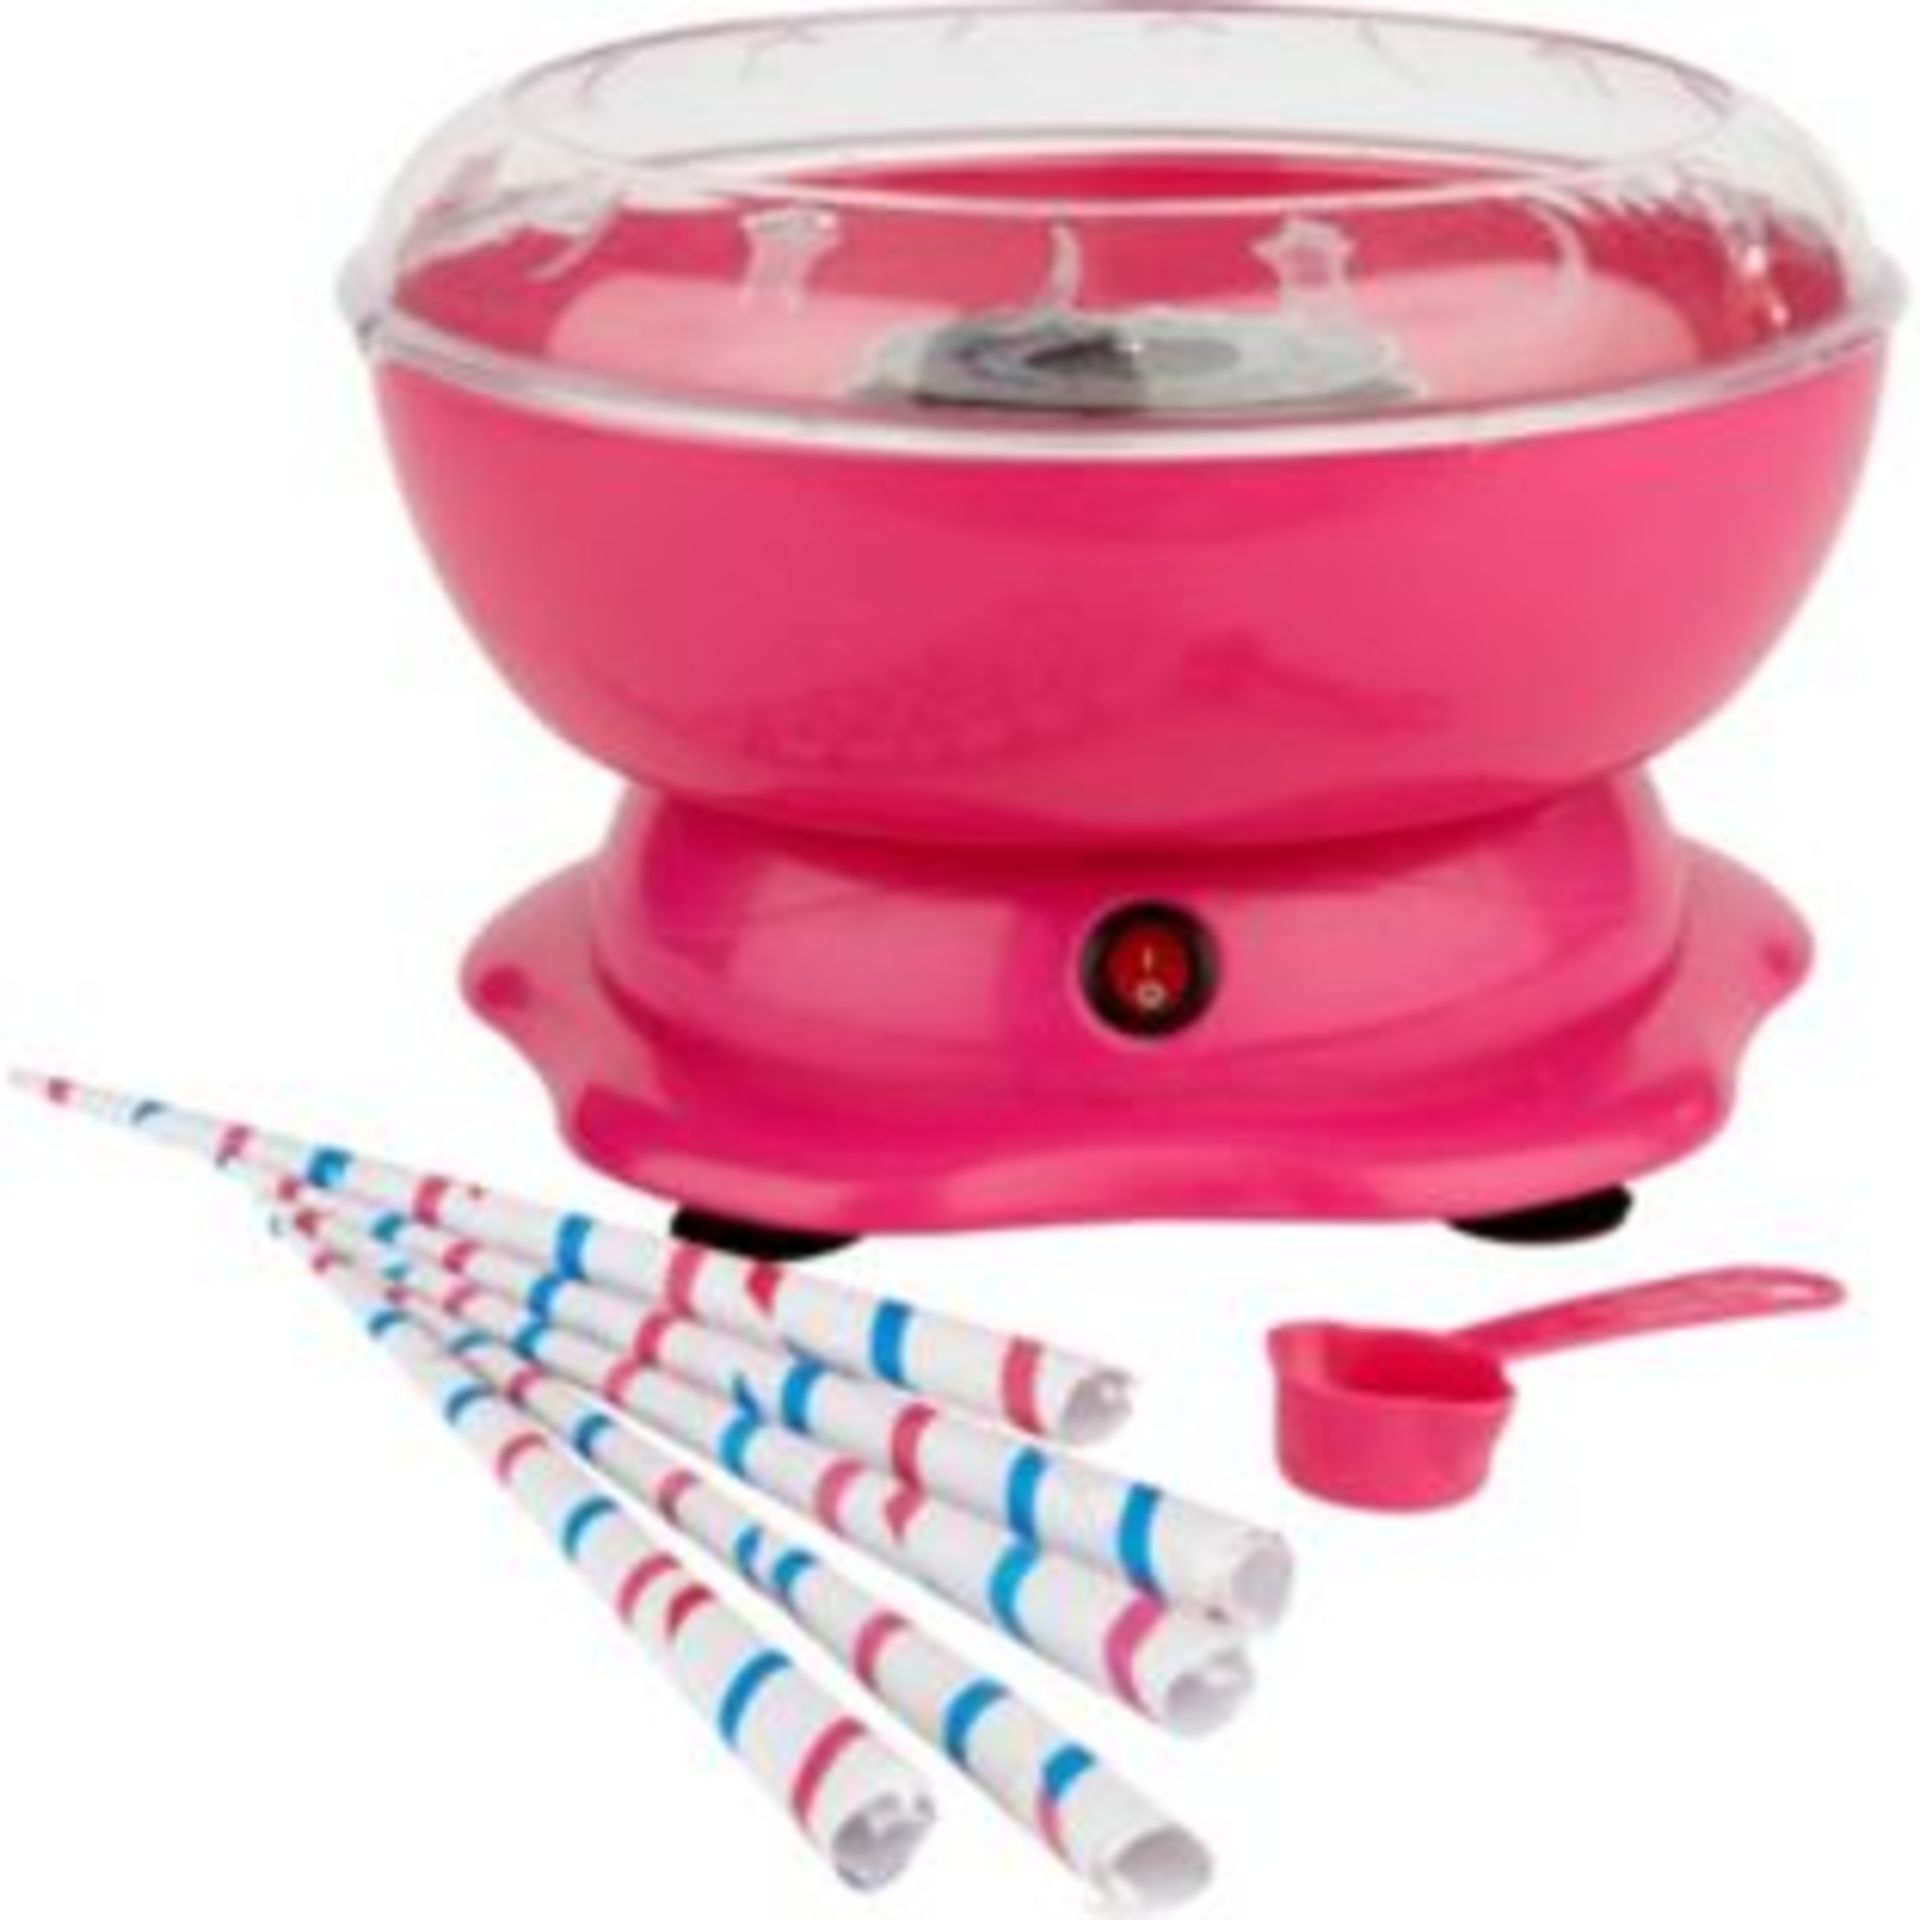 PINK CANDY FLOSS MAKER (SHIPPING BAND A)